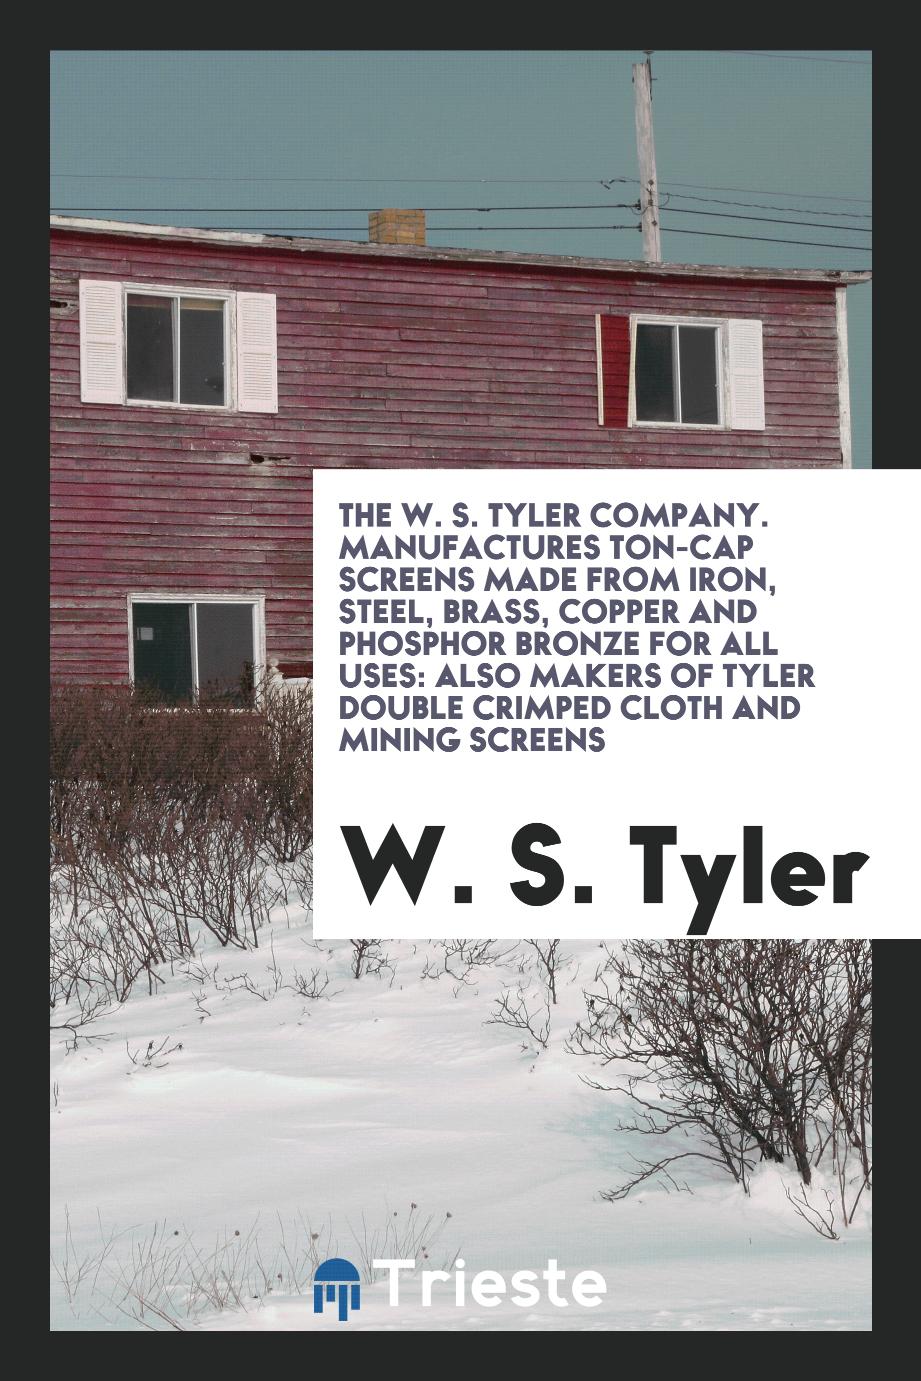 The W. S. Tyler company. Manufactures Ton-Cap Screens made from iron, steel, brass, copper and phosphor bronze for all uses: also makers of Tyler double crimped cloth and mining screens